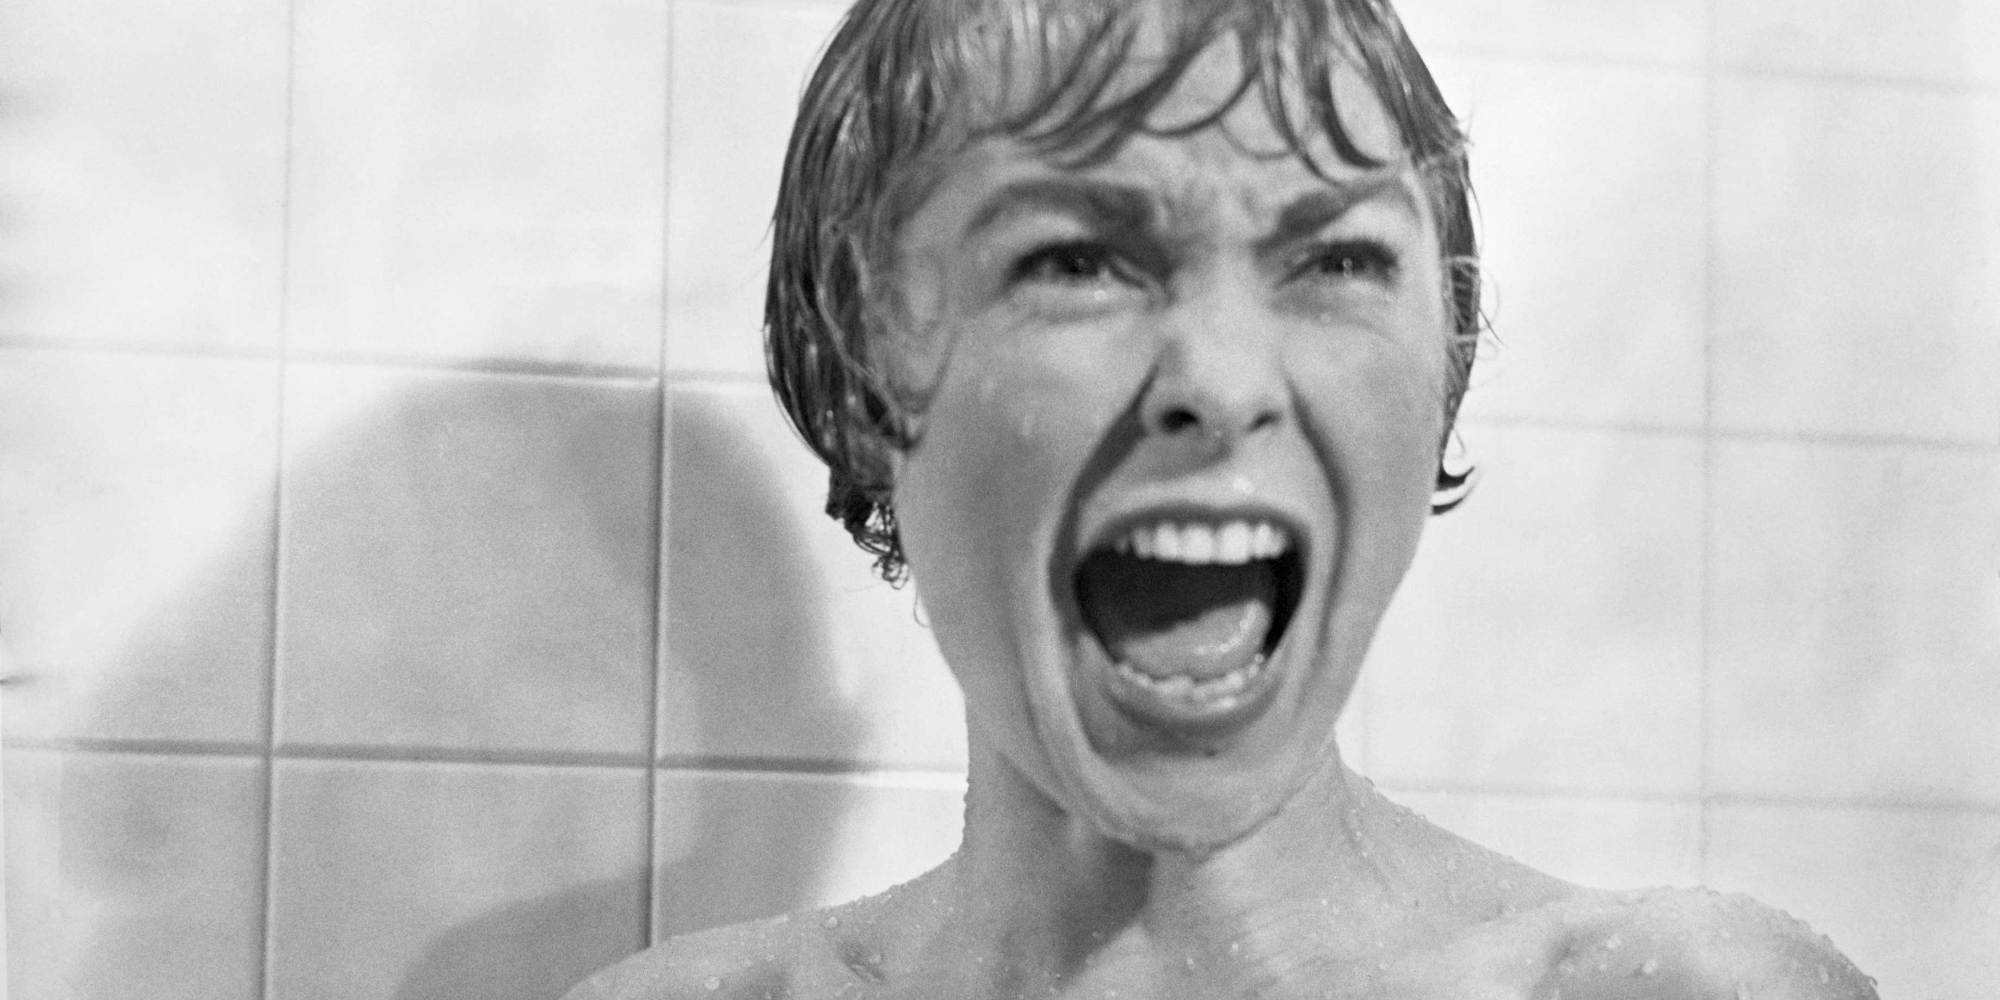 Psycho marion is stabbed in the shower by norman bates